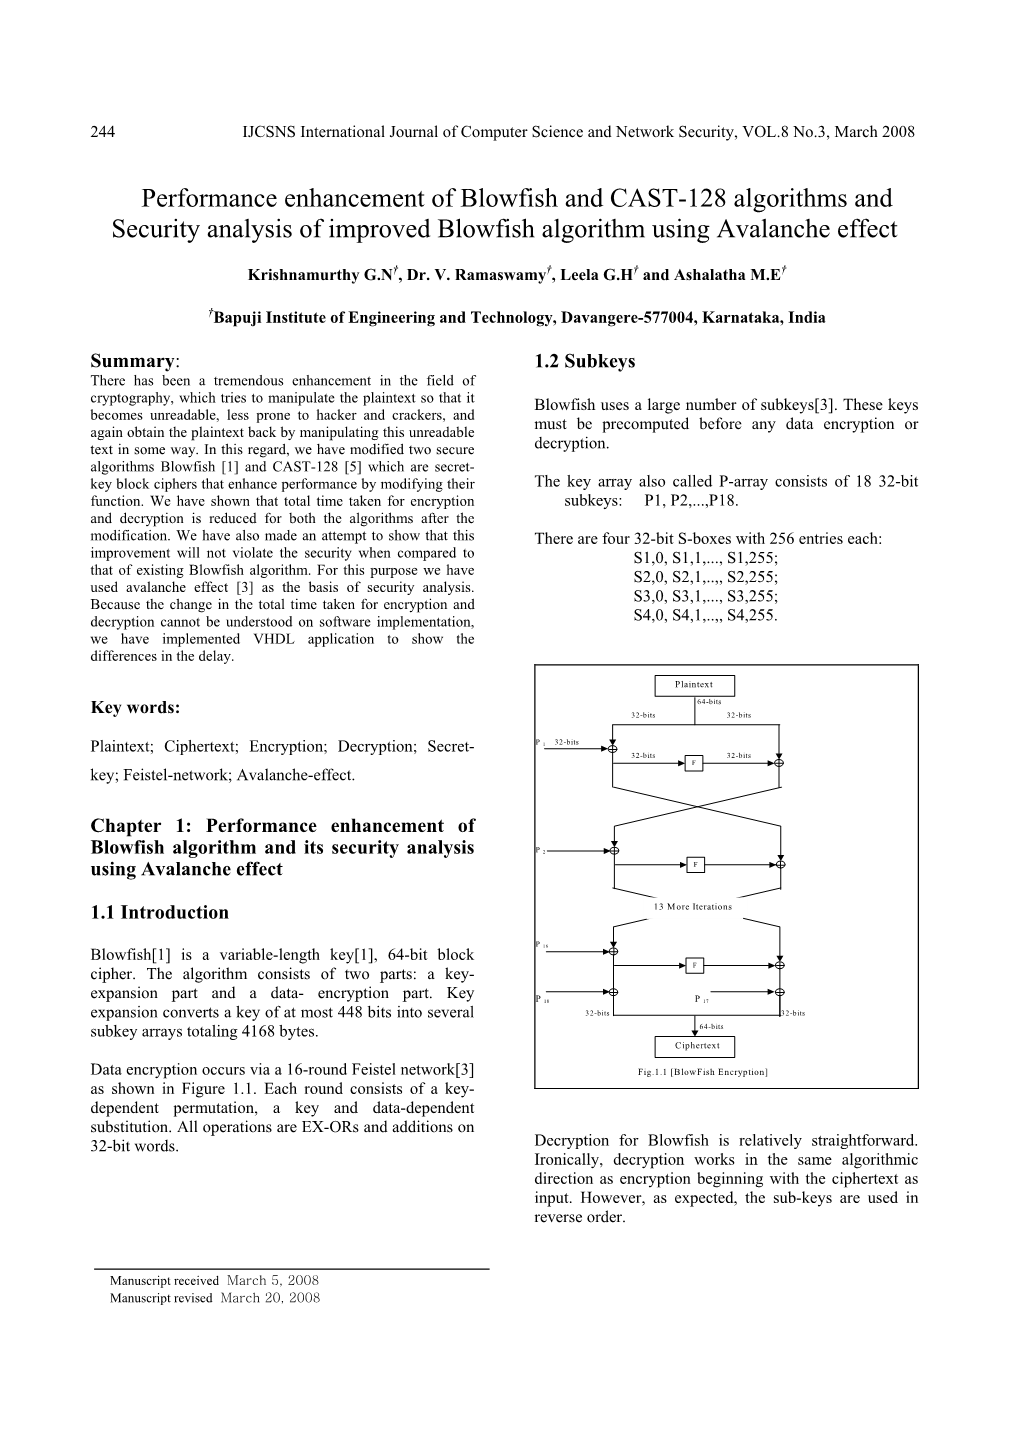 Performance Enhancement of Blowfish and CAST-128 Algorithms and Security Analysis of Improved Blowfish Algorithm Using Avalanche Effect